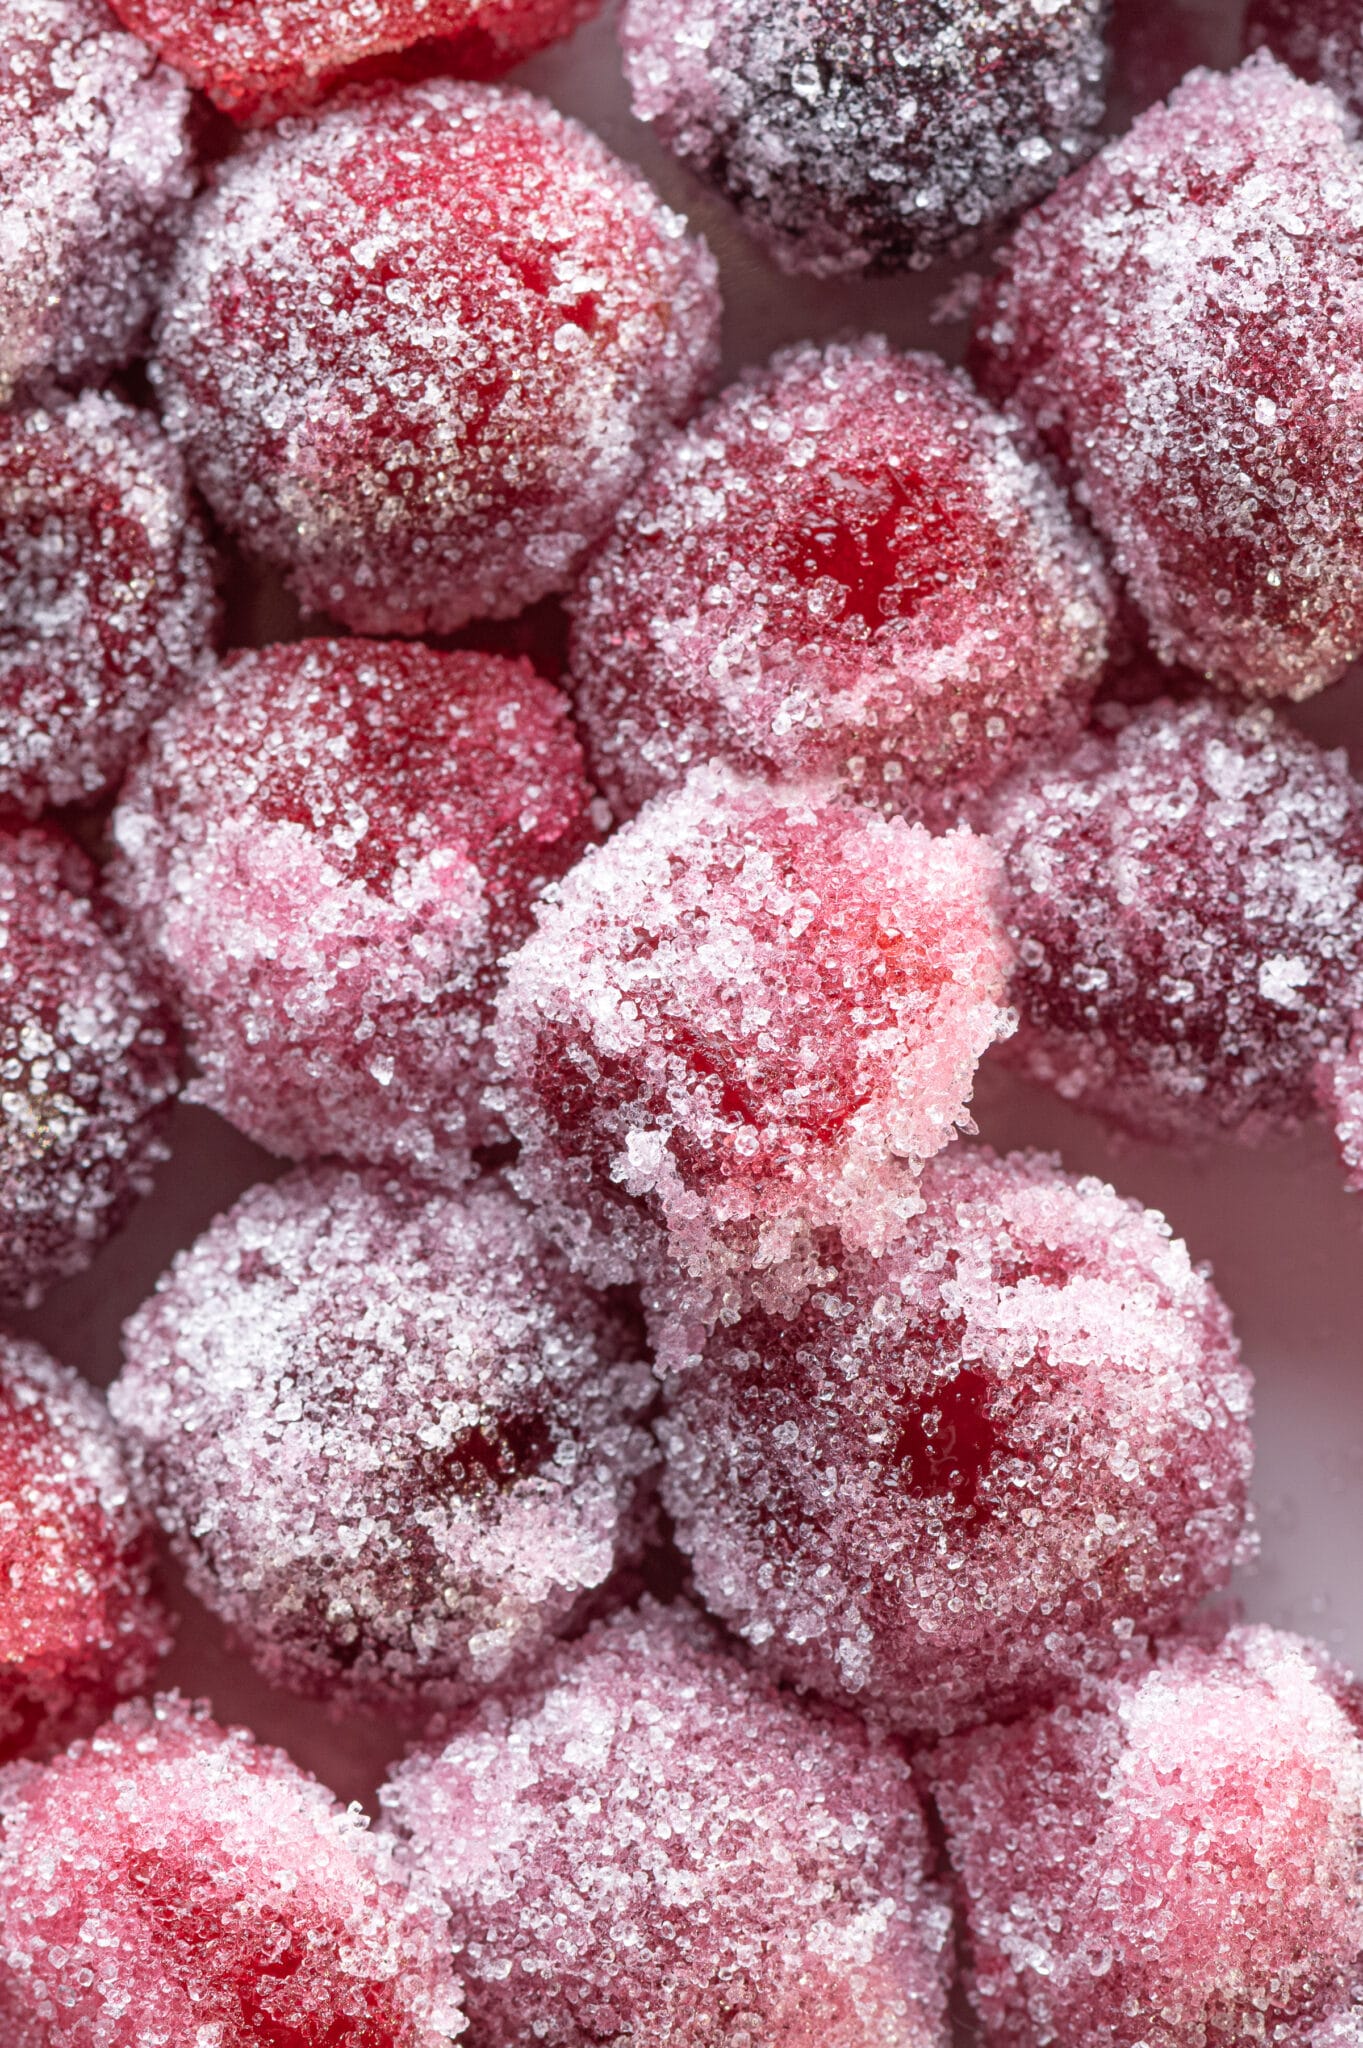 Close up image of sugar-free candied cranberries coated in granular sweetener